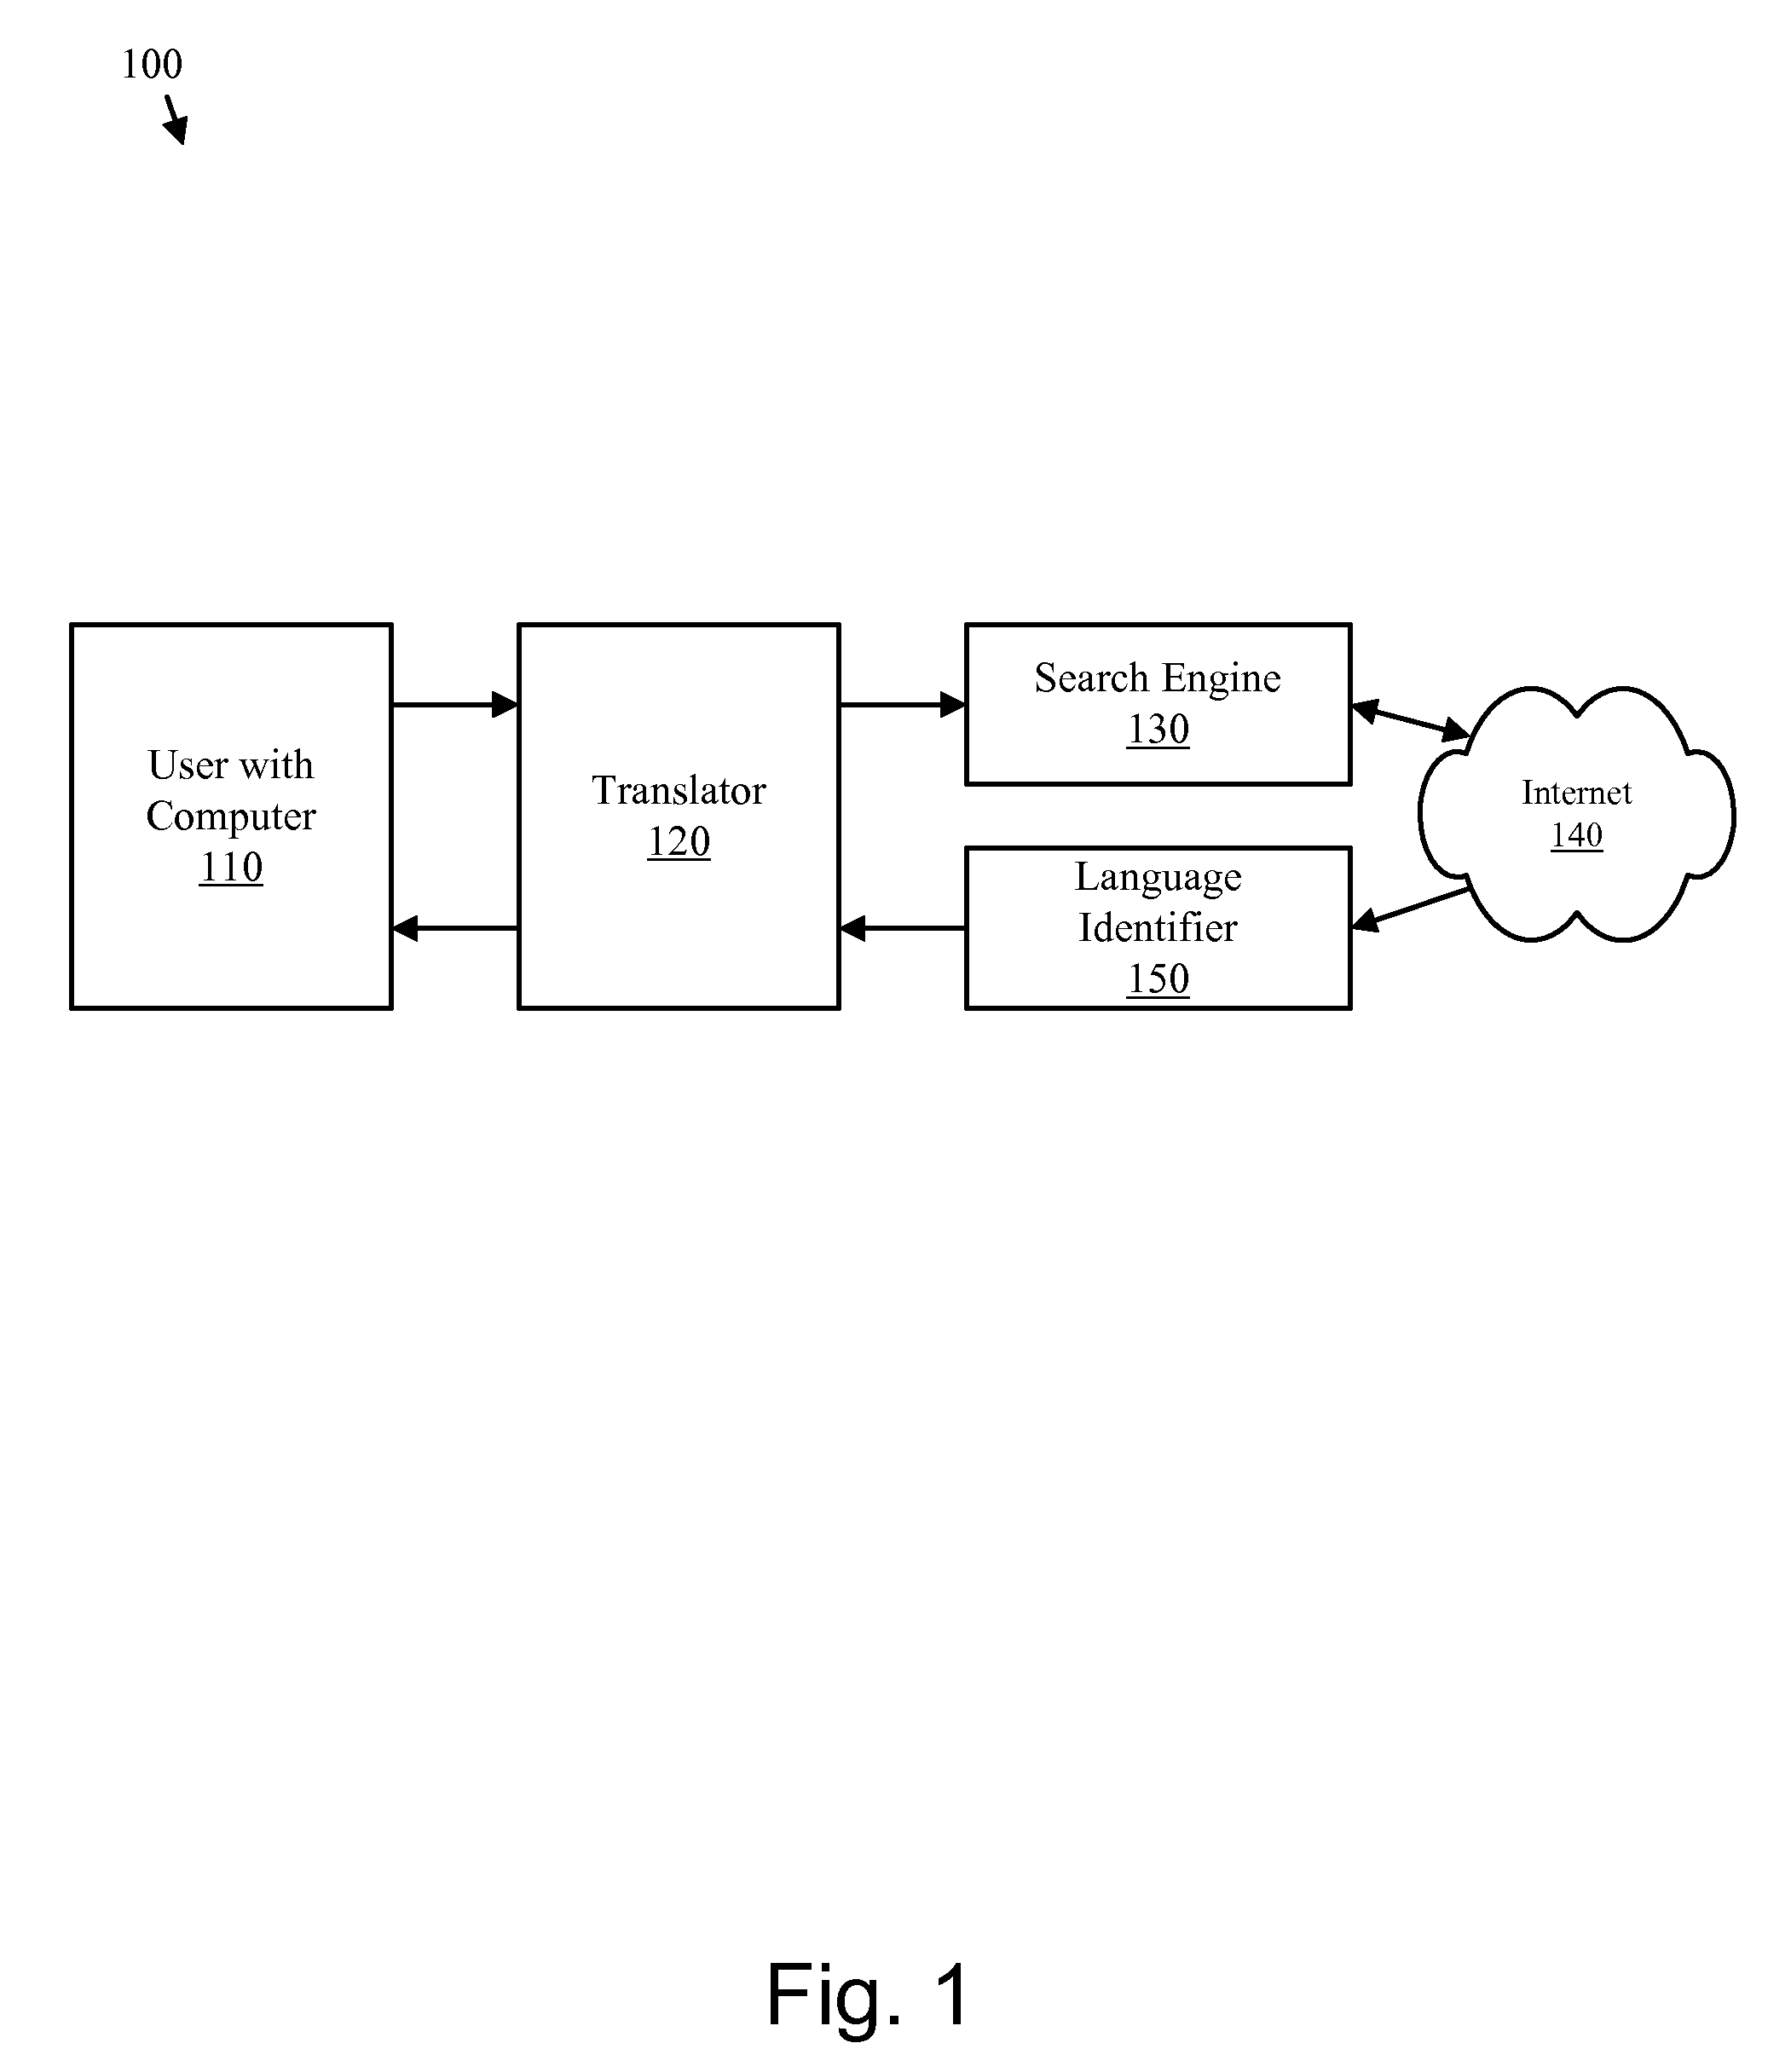 Method for multi-lingual search and data mining